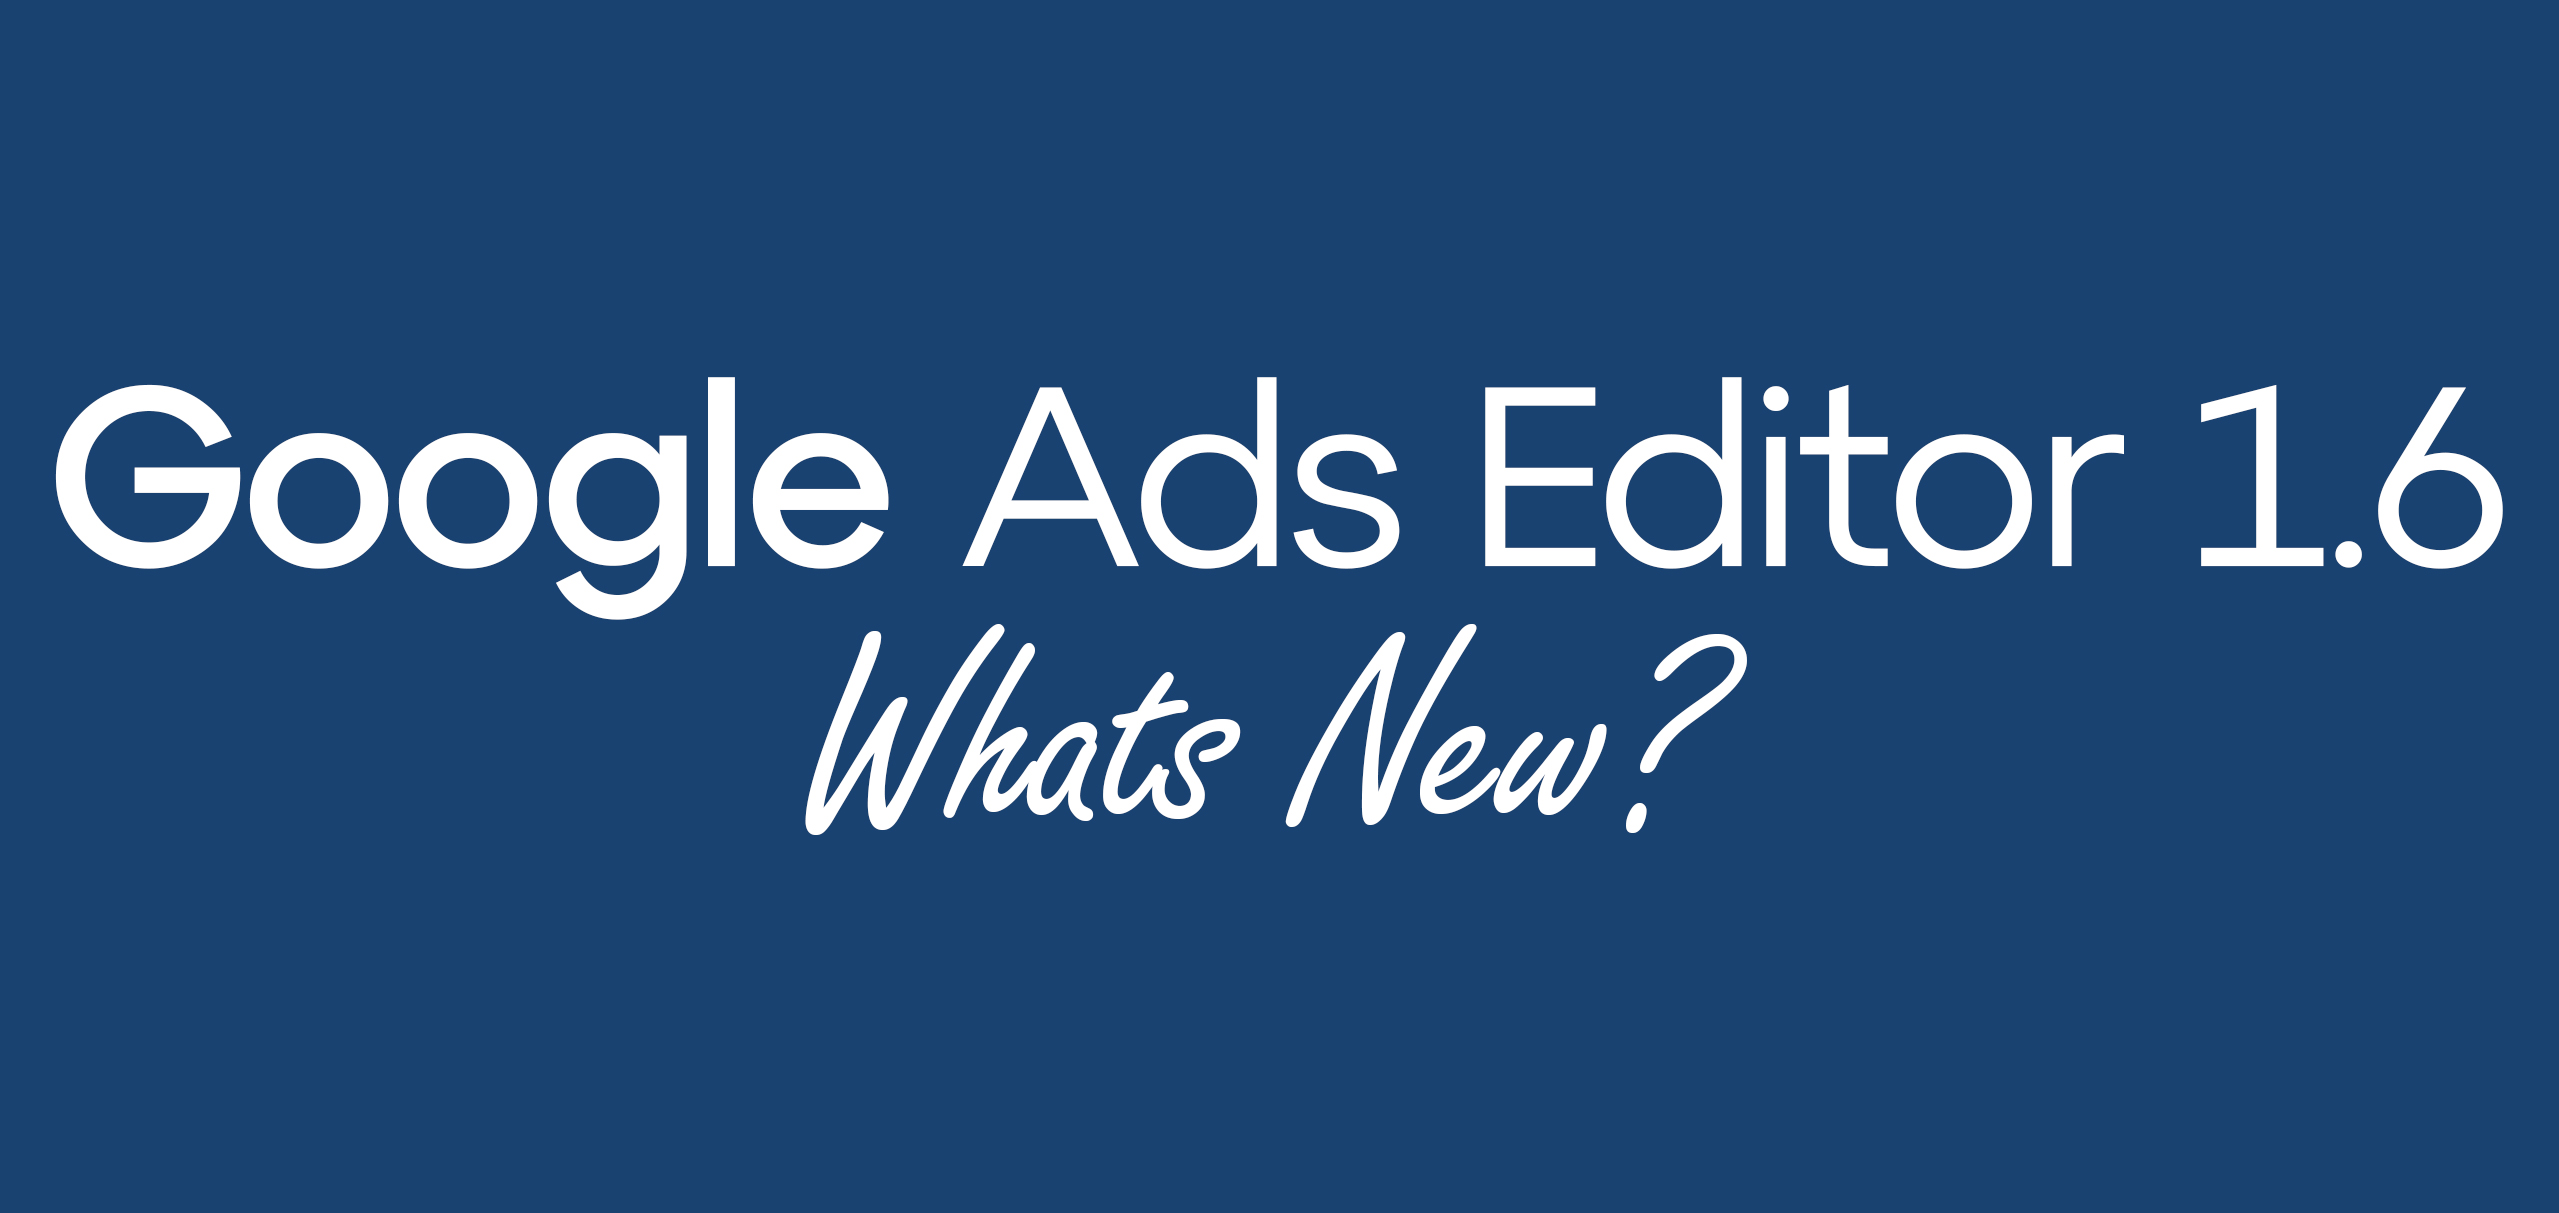 What’s new in Google Ads Editor version 1.6